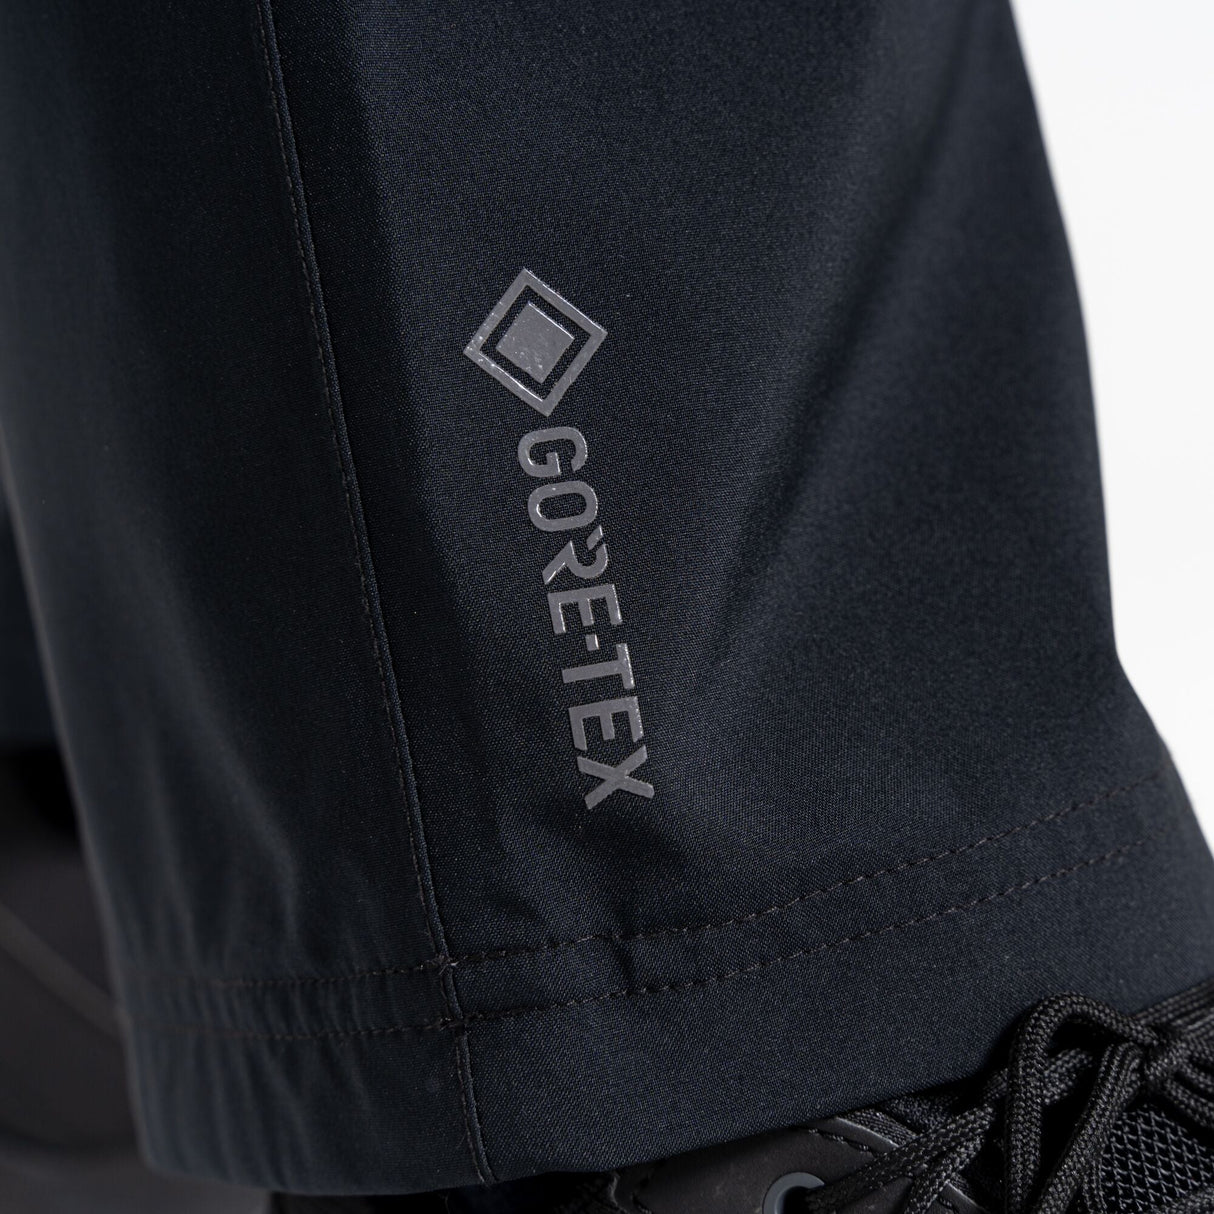 Craghoppers Expert Gore-Tex Trousers